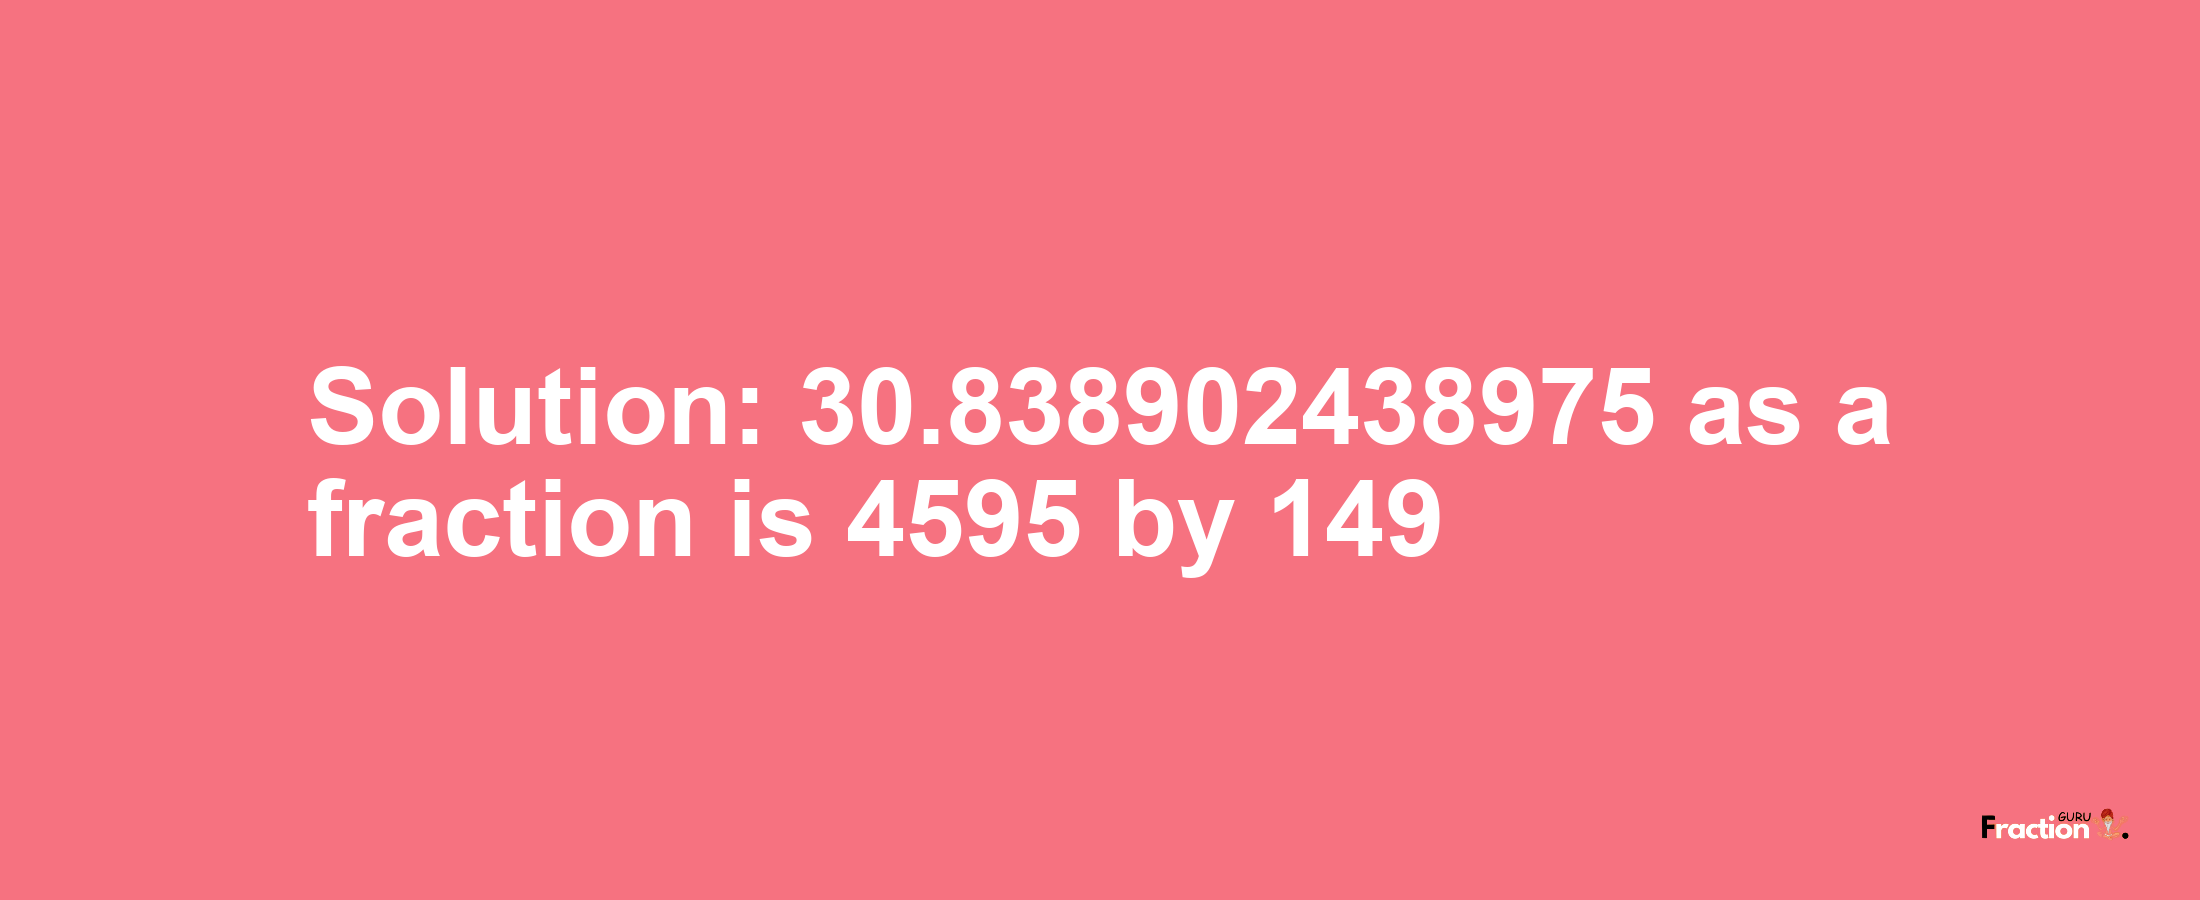 Solution:30.838902438975 as a fraction is 4595/149